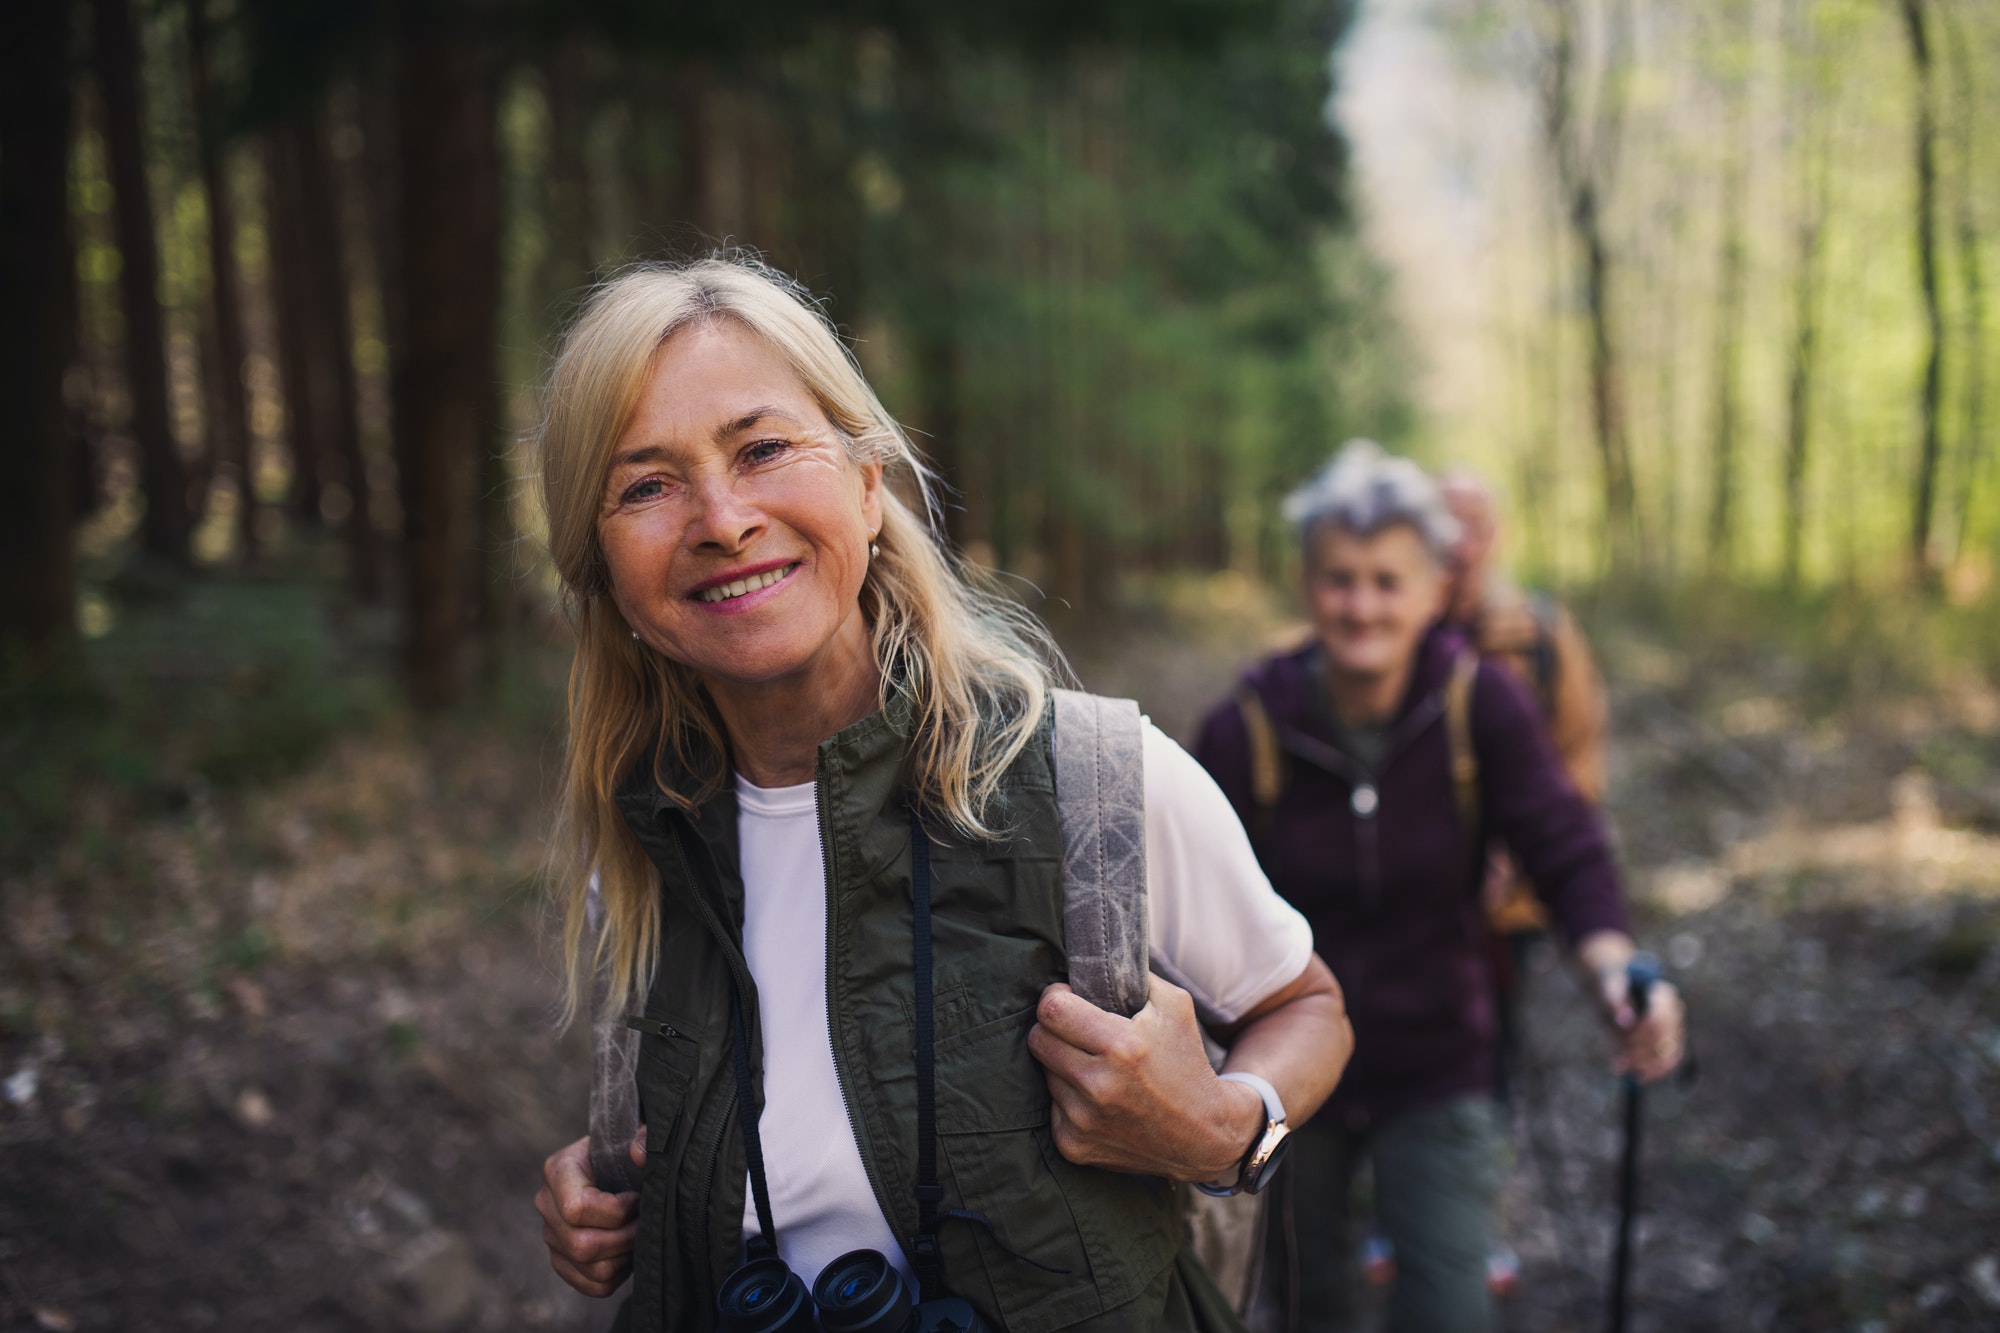 Senior women hikers outdoors walking in forest in nature, looking at camera